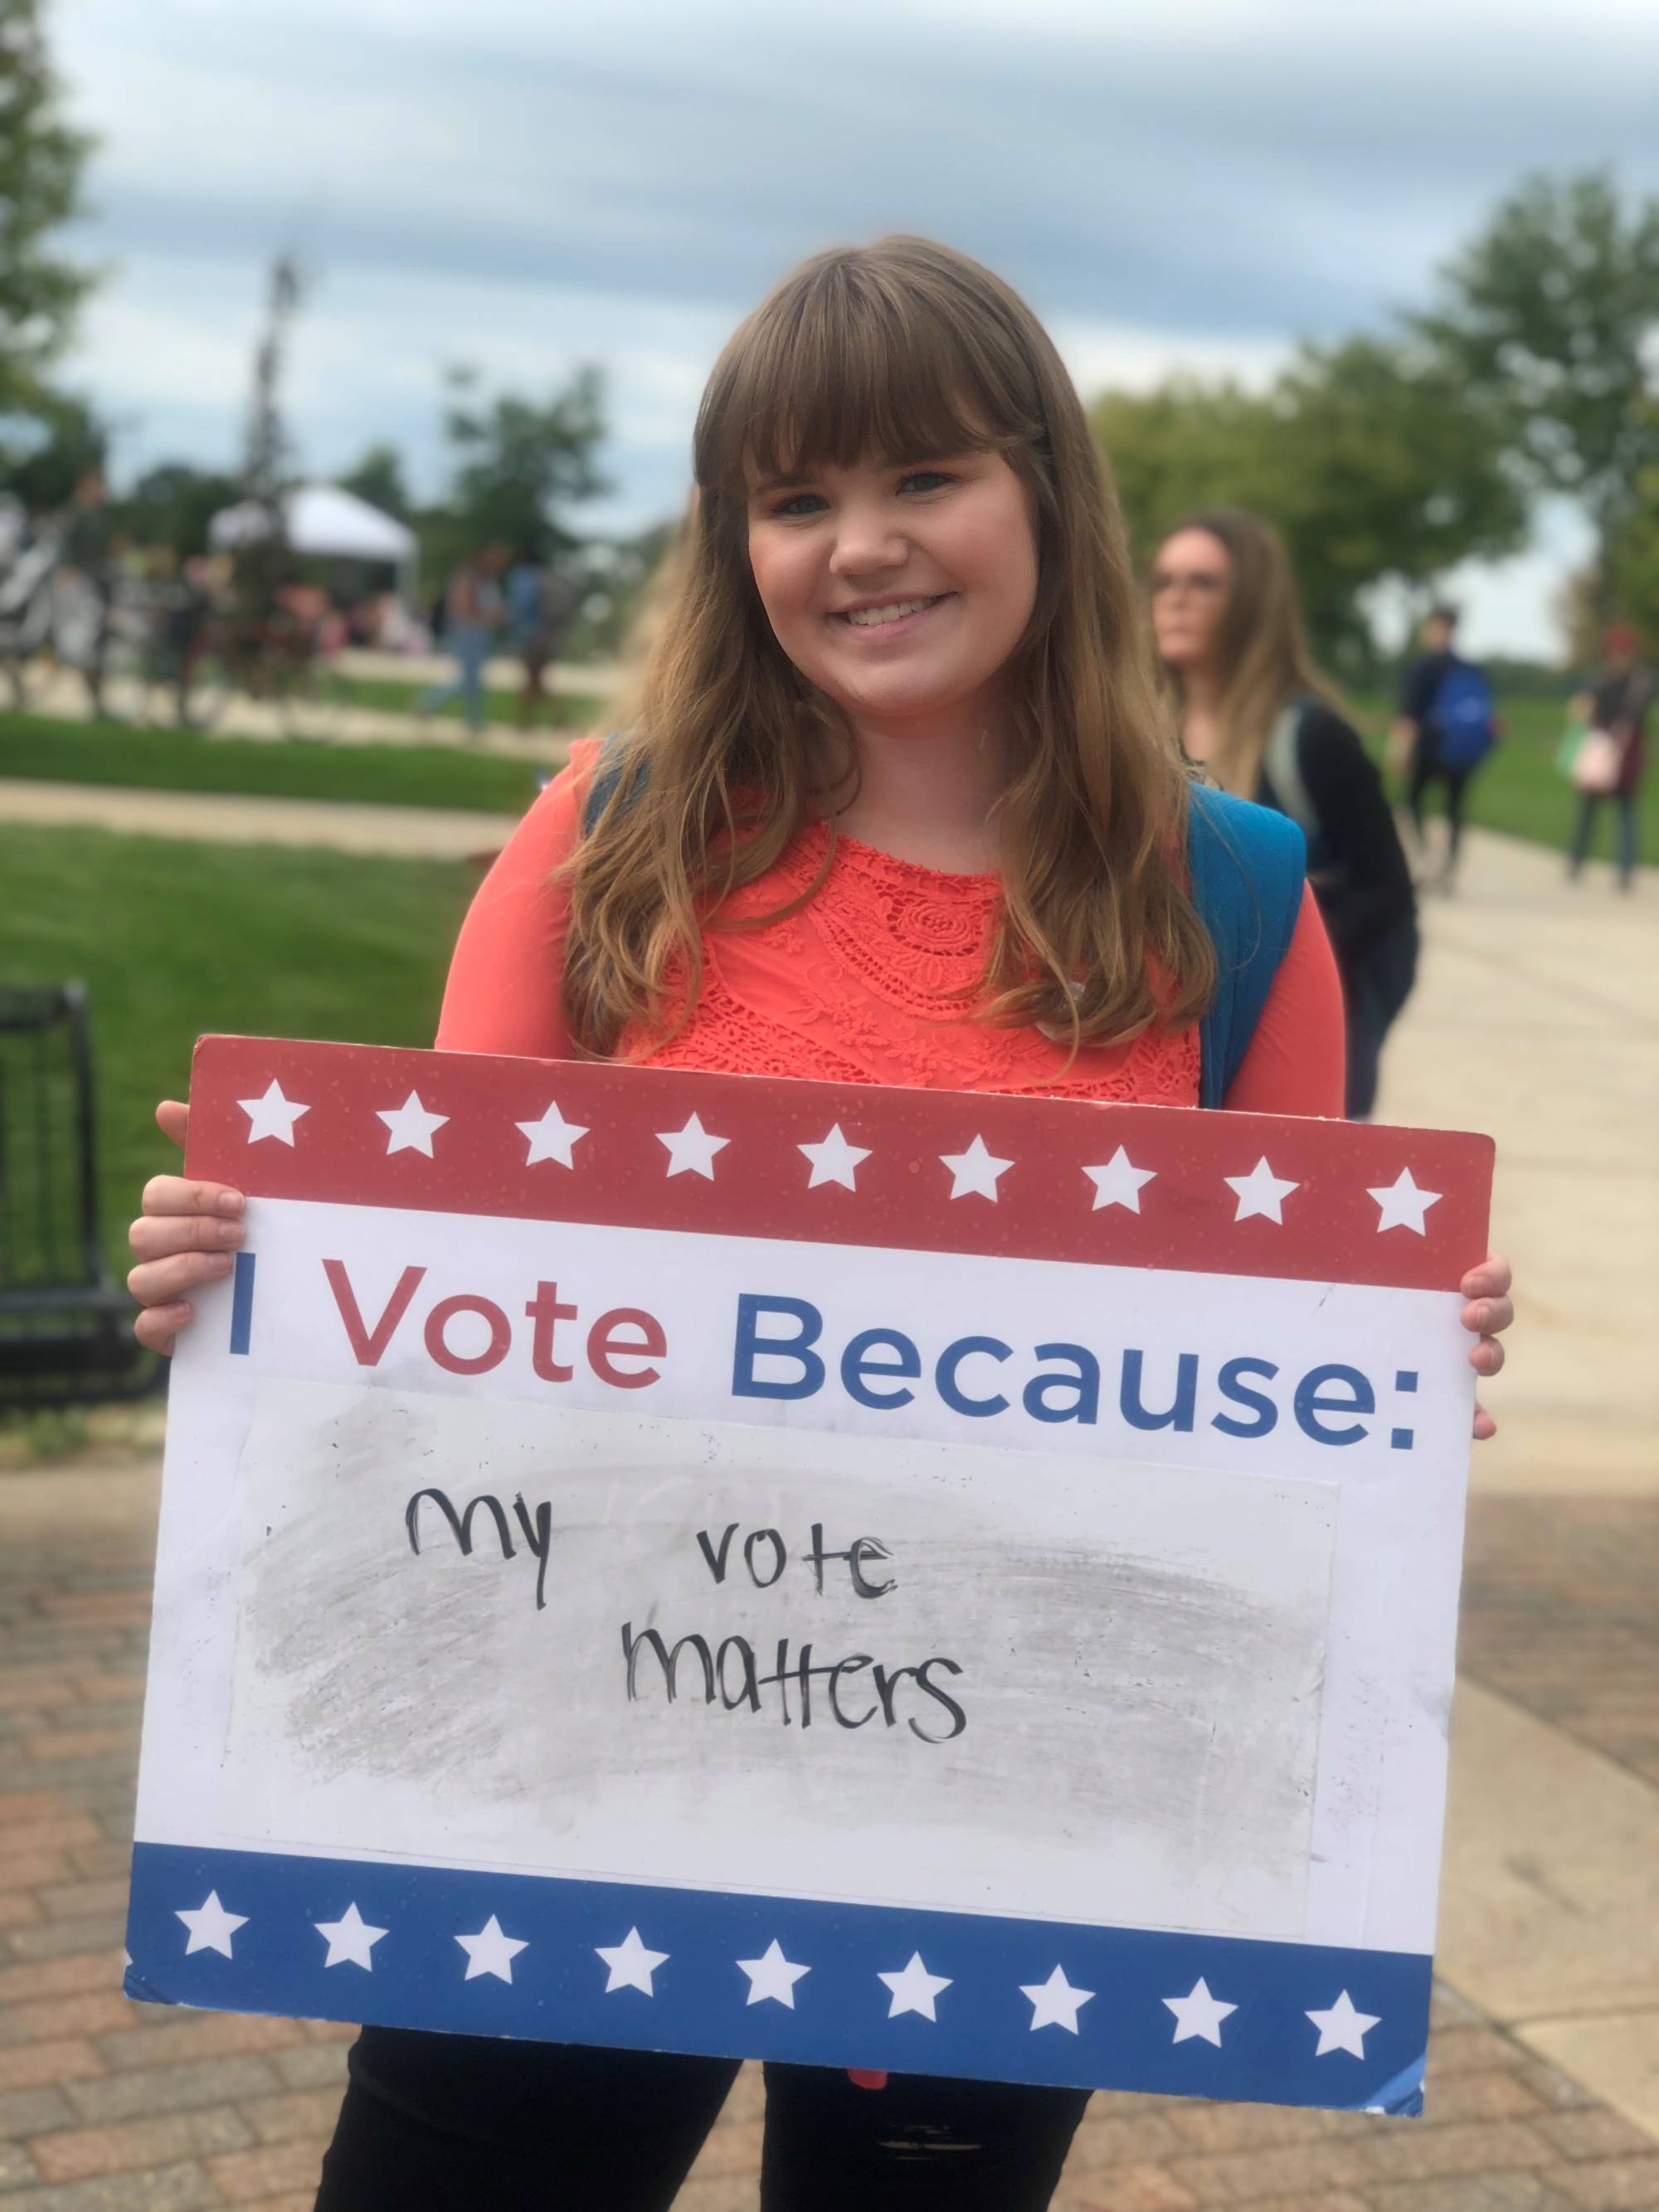 Student holding sign titled "I vote because: My vote matters"